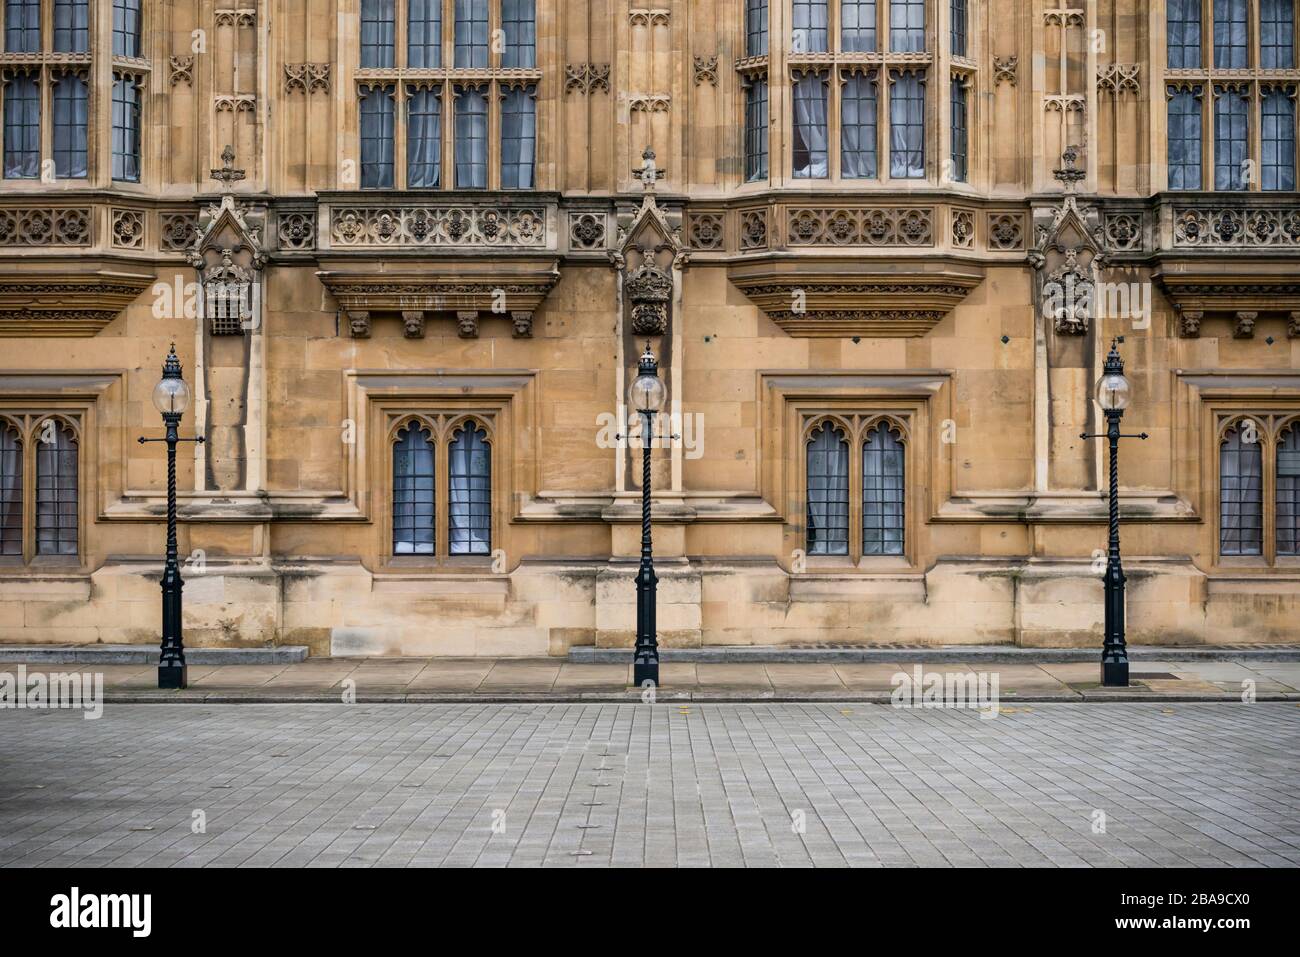 Architectural details of Palace of Westminster, London, UK Stock Photo